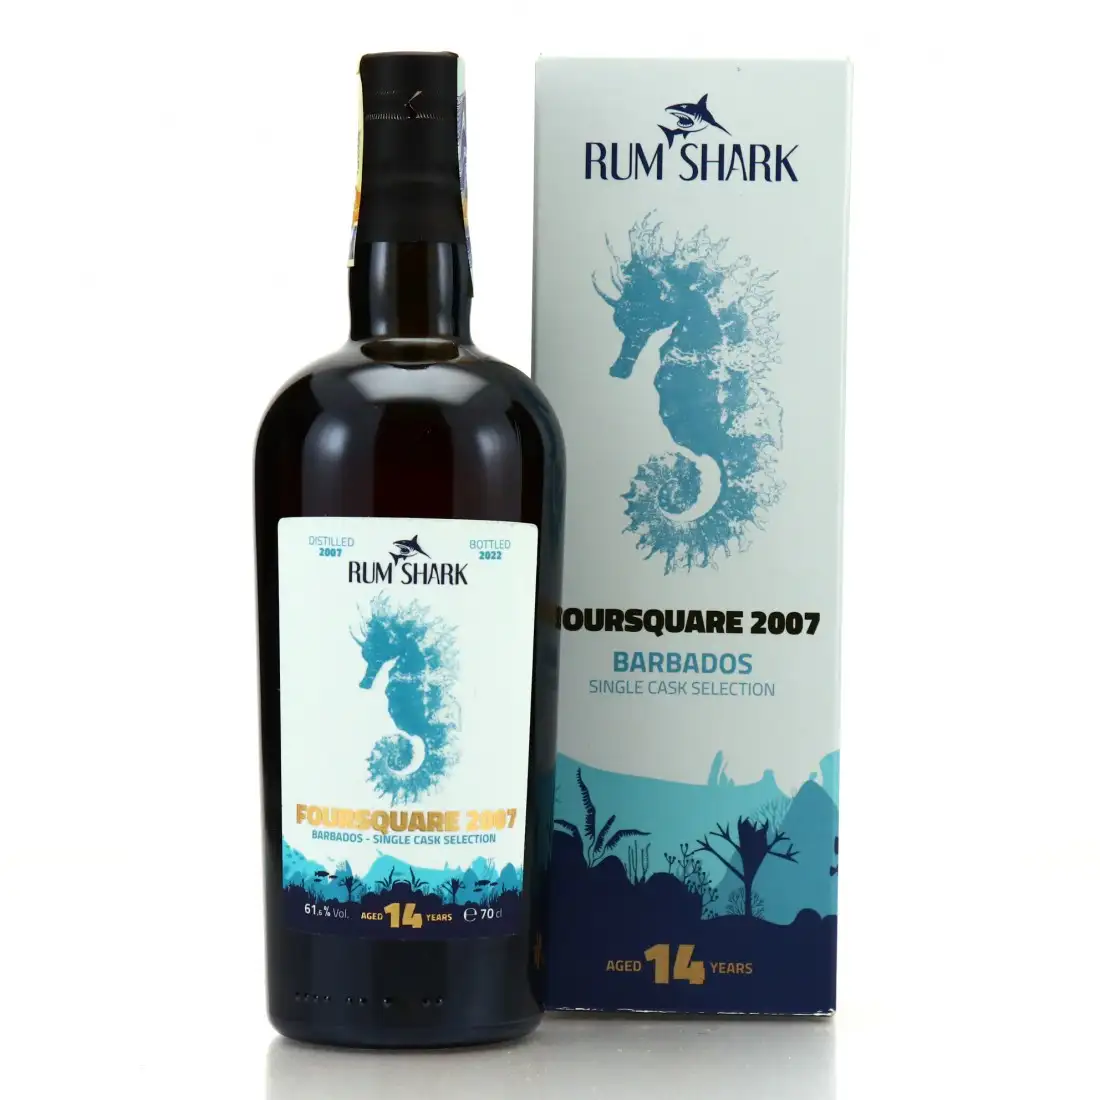 Image of the front of the bottle of the rum Barbados Single Cask Selection